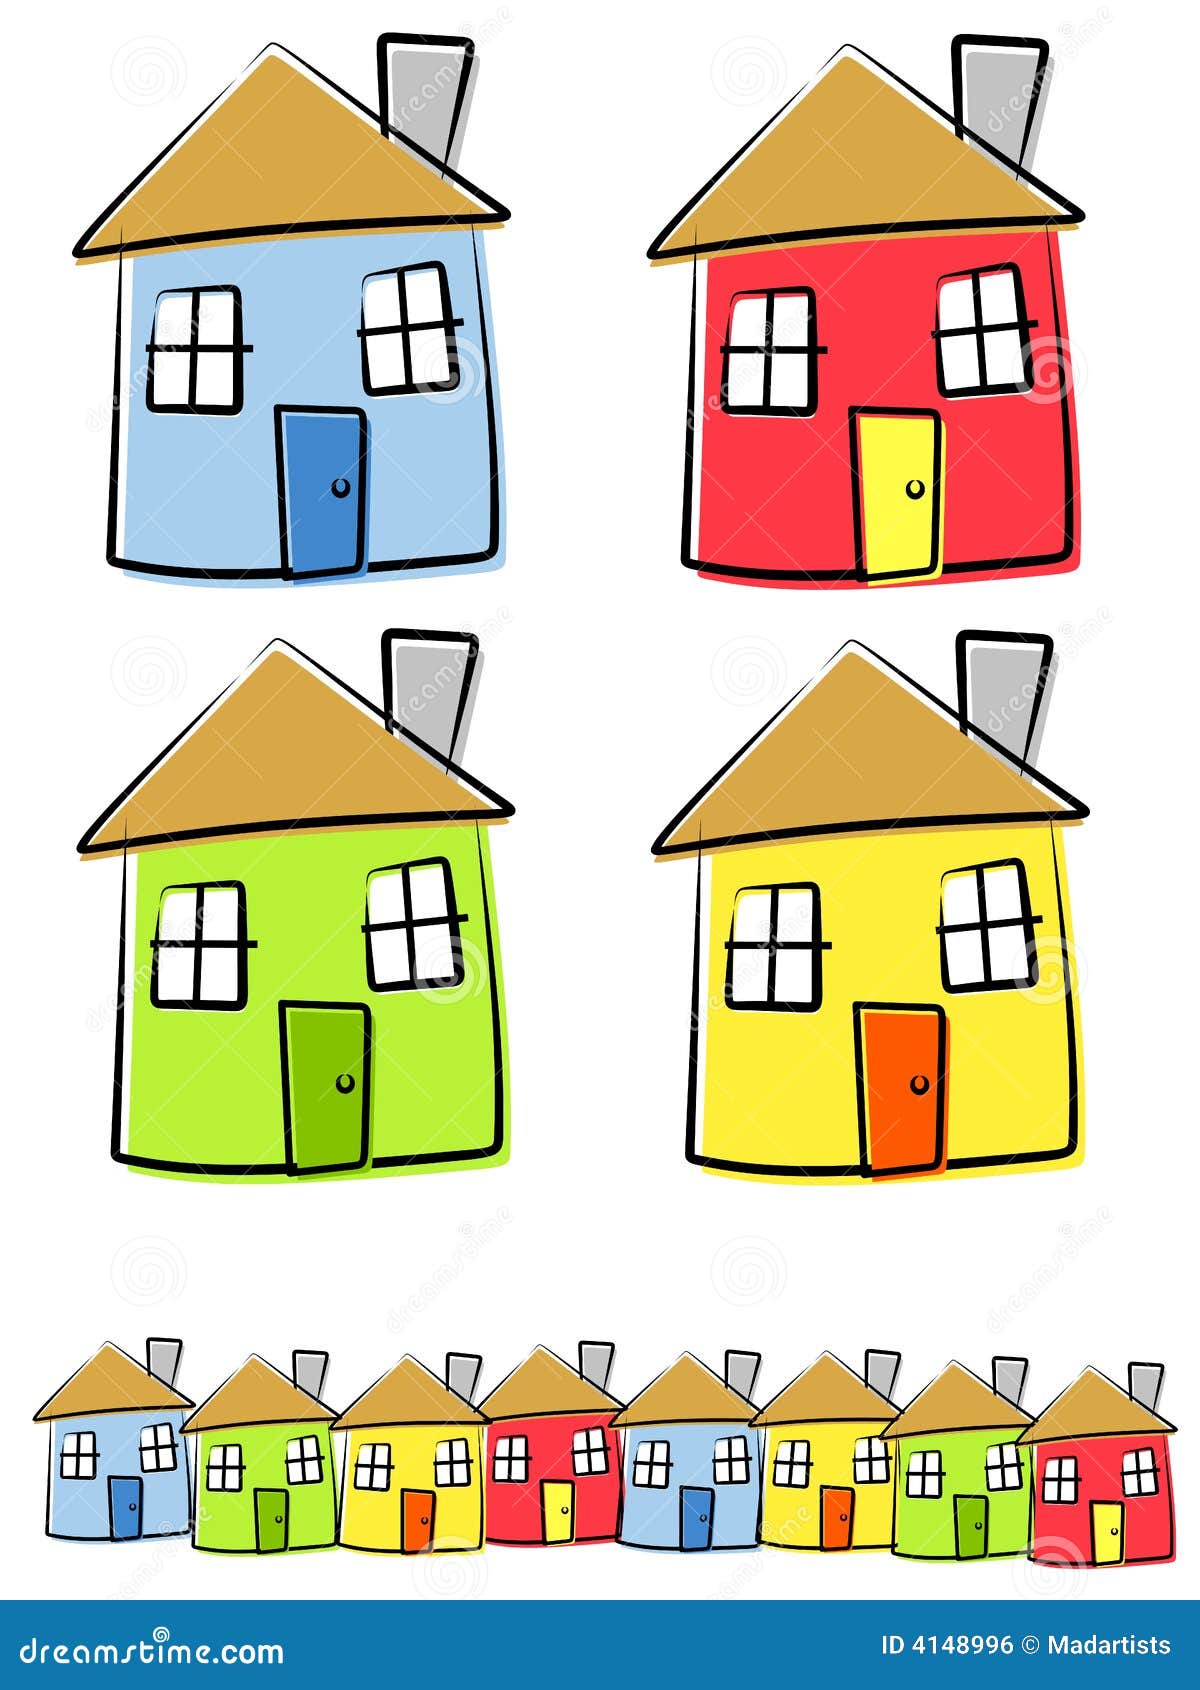 house drawing clipart - photo #29